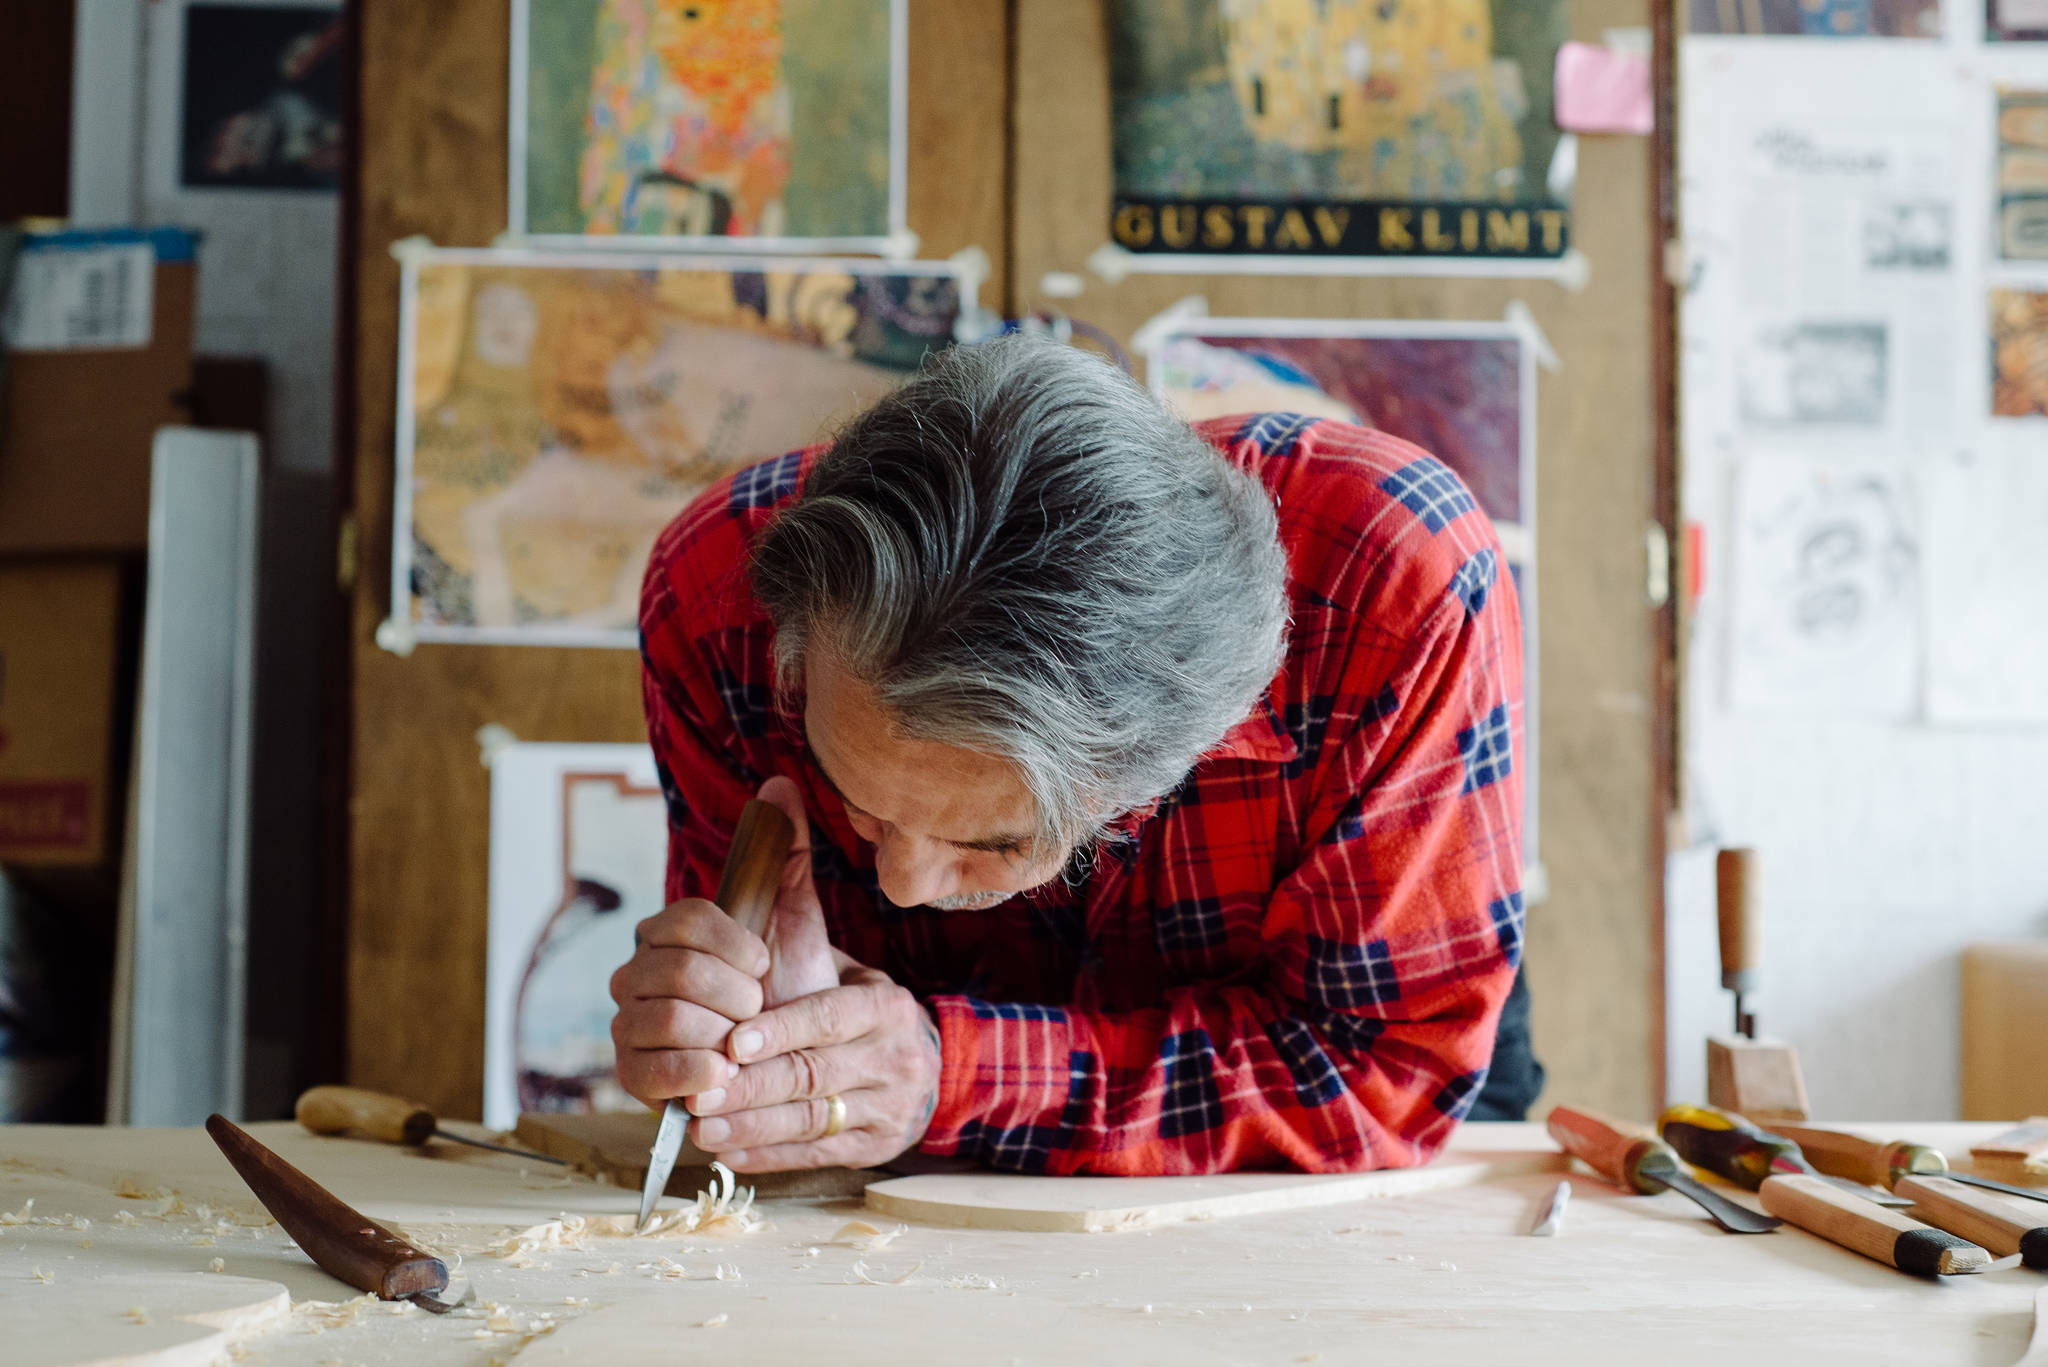 Robert Hoffman works on a large-scale carving. (Photo by Sarah O’Leary)